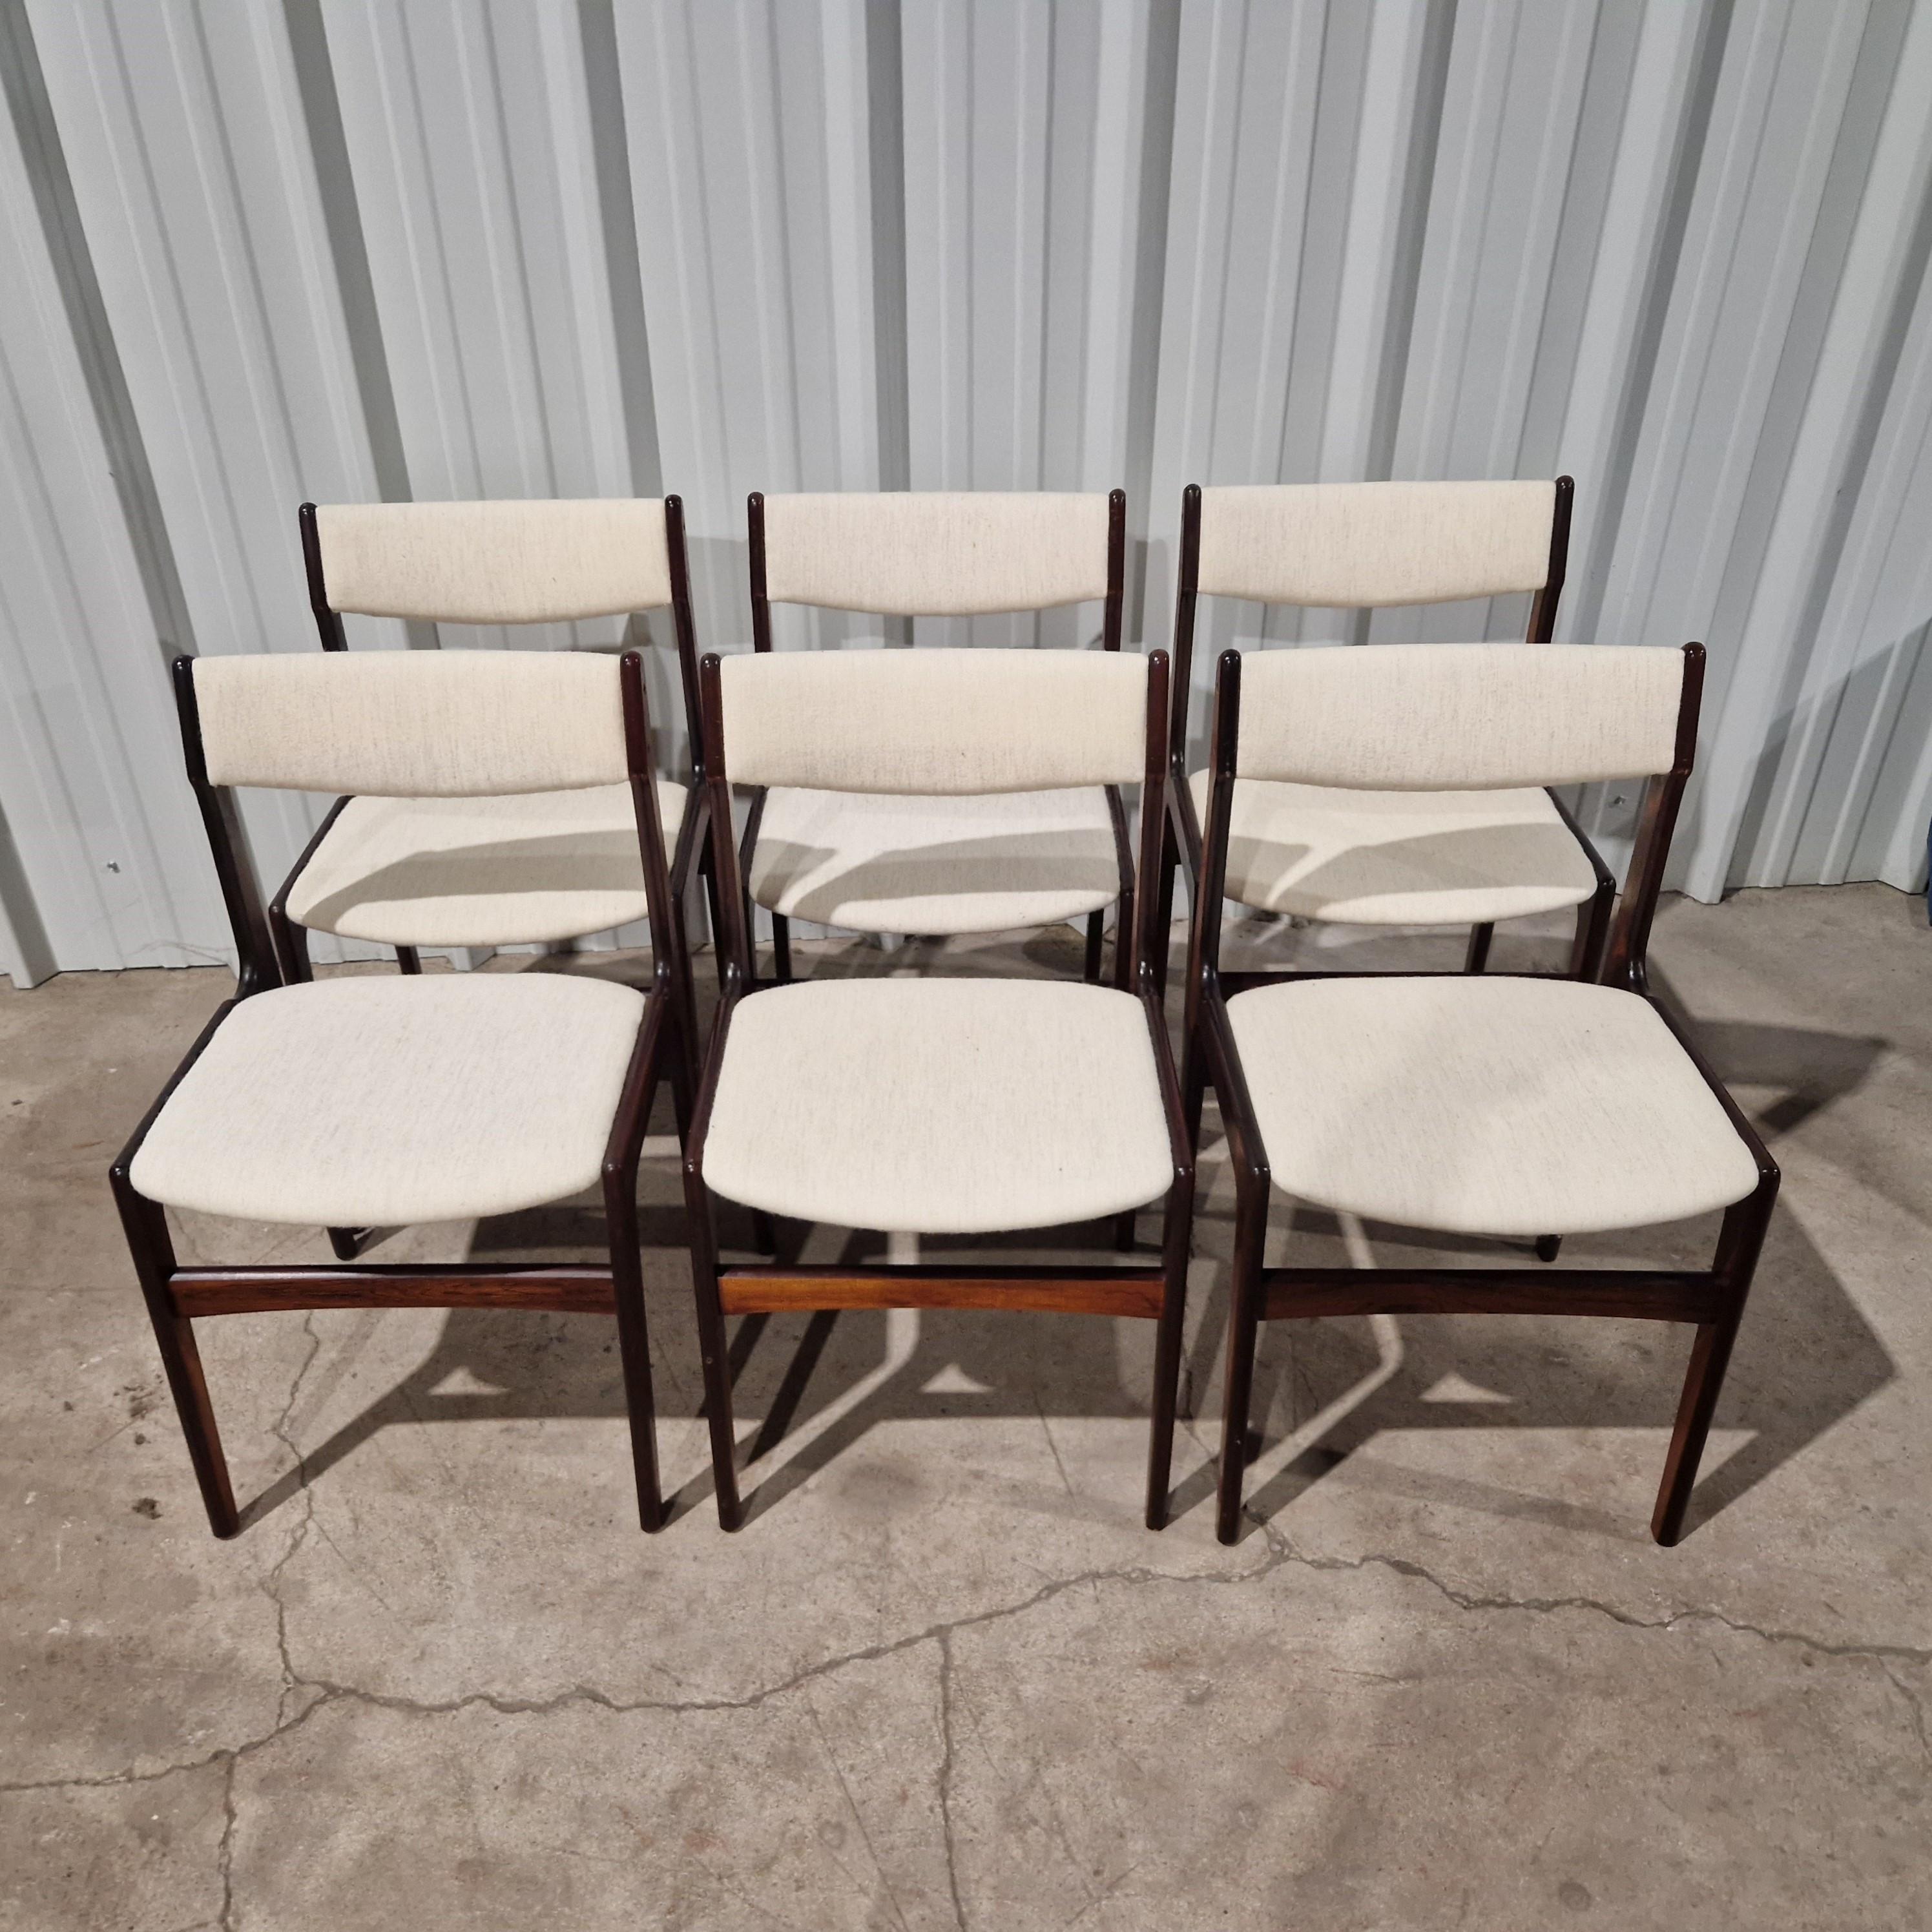 20th Century Set of 6 scandinavian chairs by Erik Buch, Denmark, 1960's For Sale